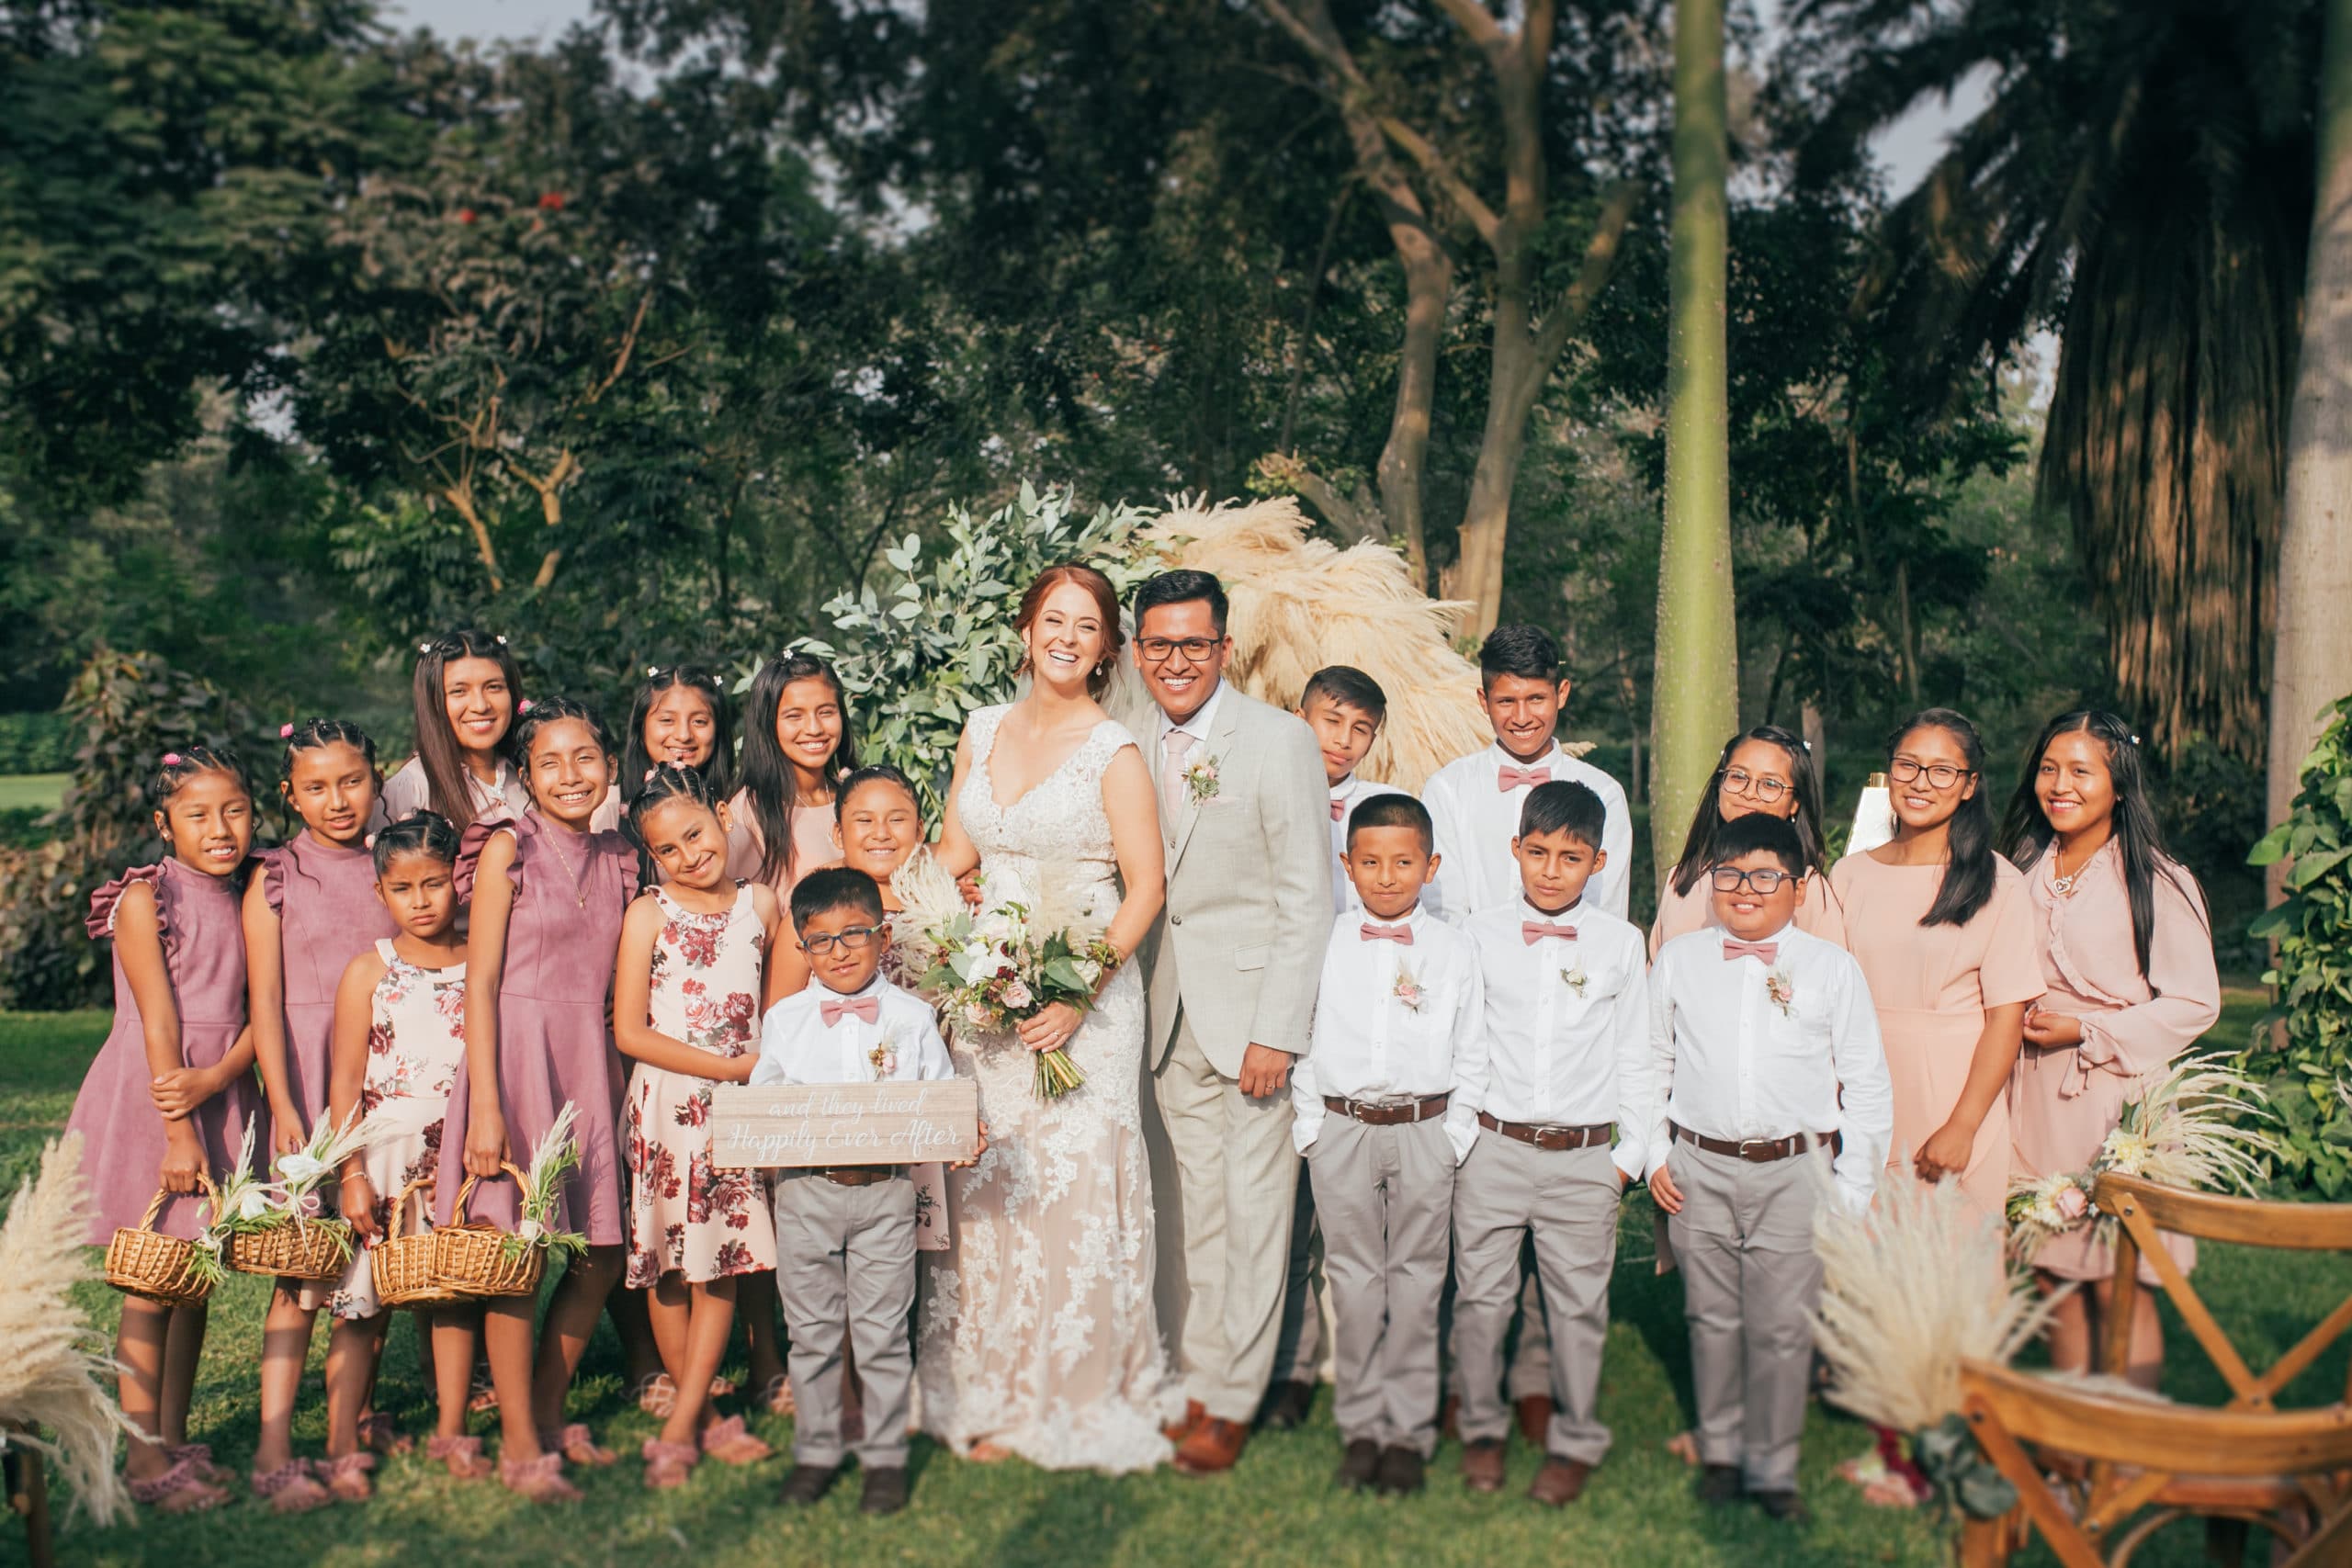 TFC Alumni Amber Carrion and husband Abel wedding photo with kids from Refuge of Hope